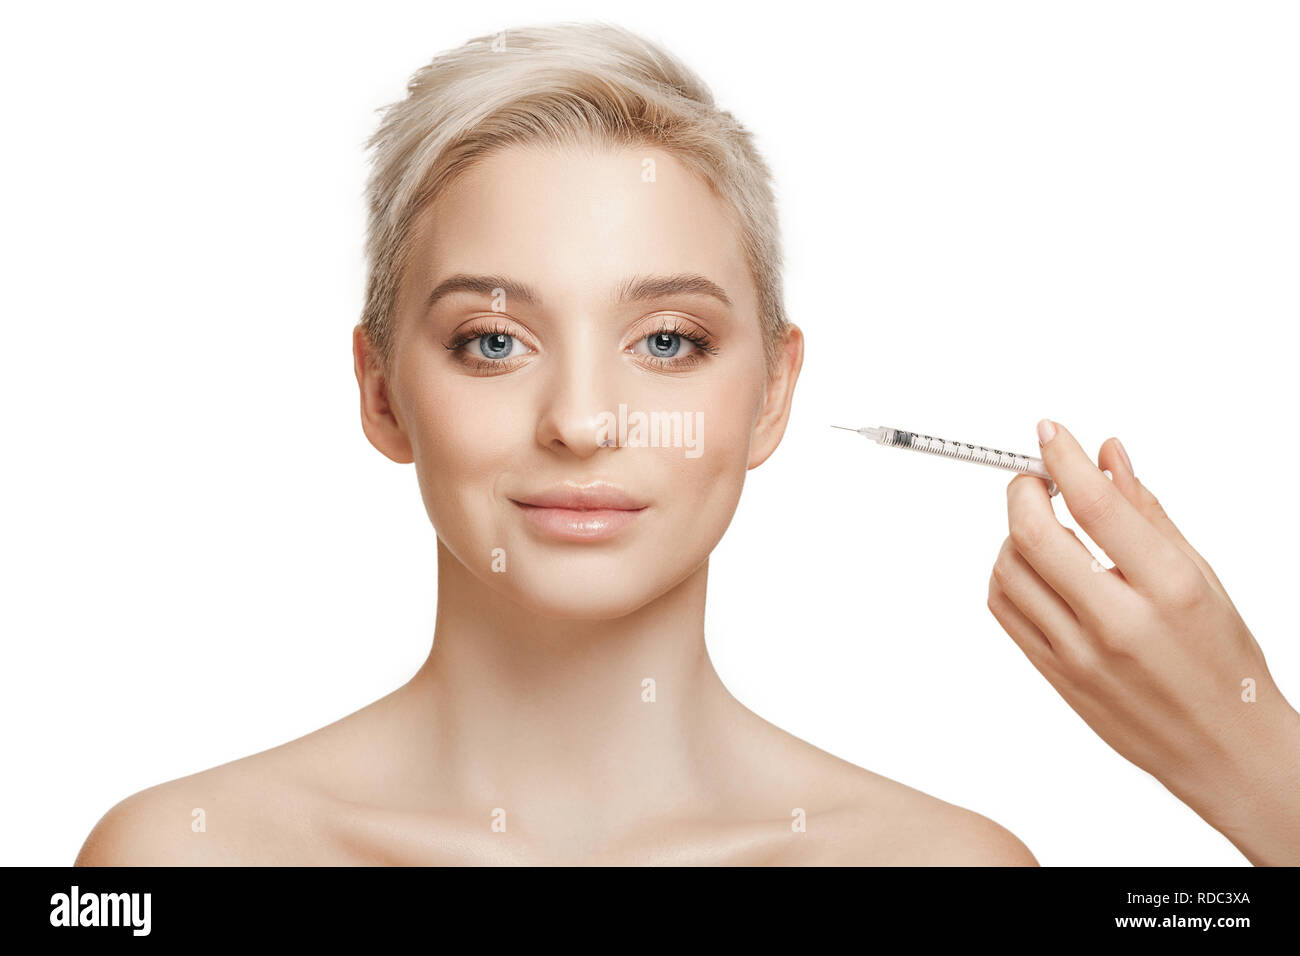 People, Lips, cosmetology, plastic surgery and beauty concept - beautiful young woman face and hand with syringe making injection Stock Photo